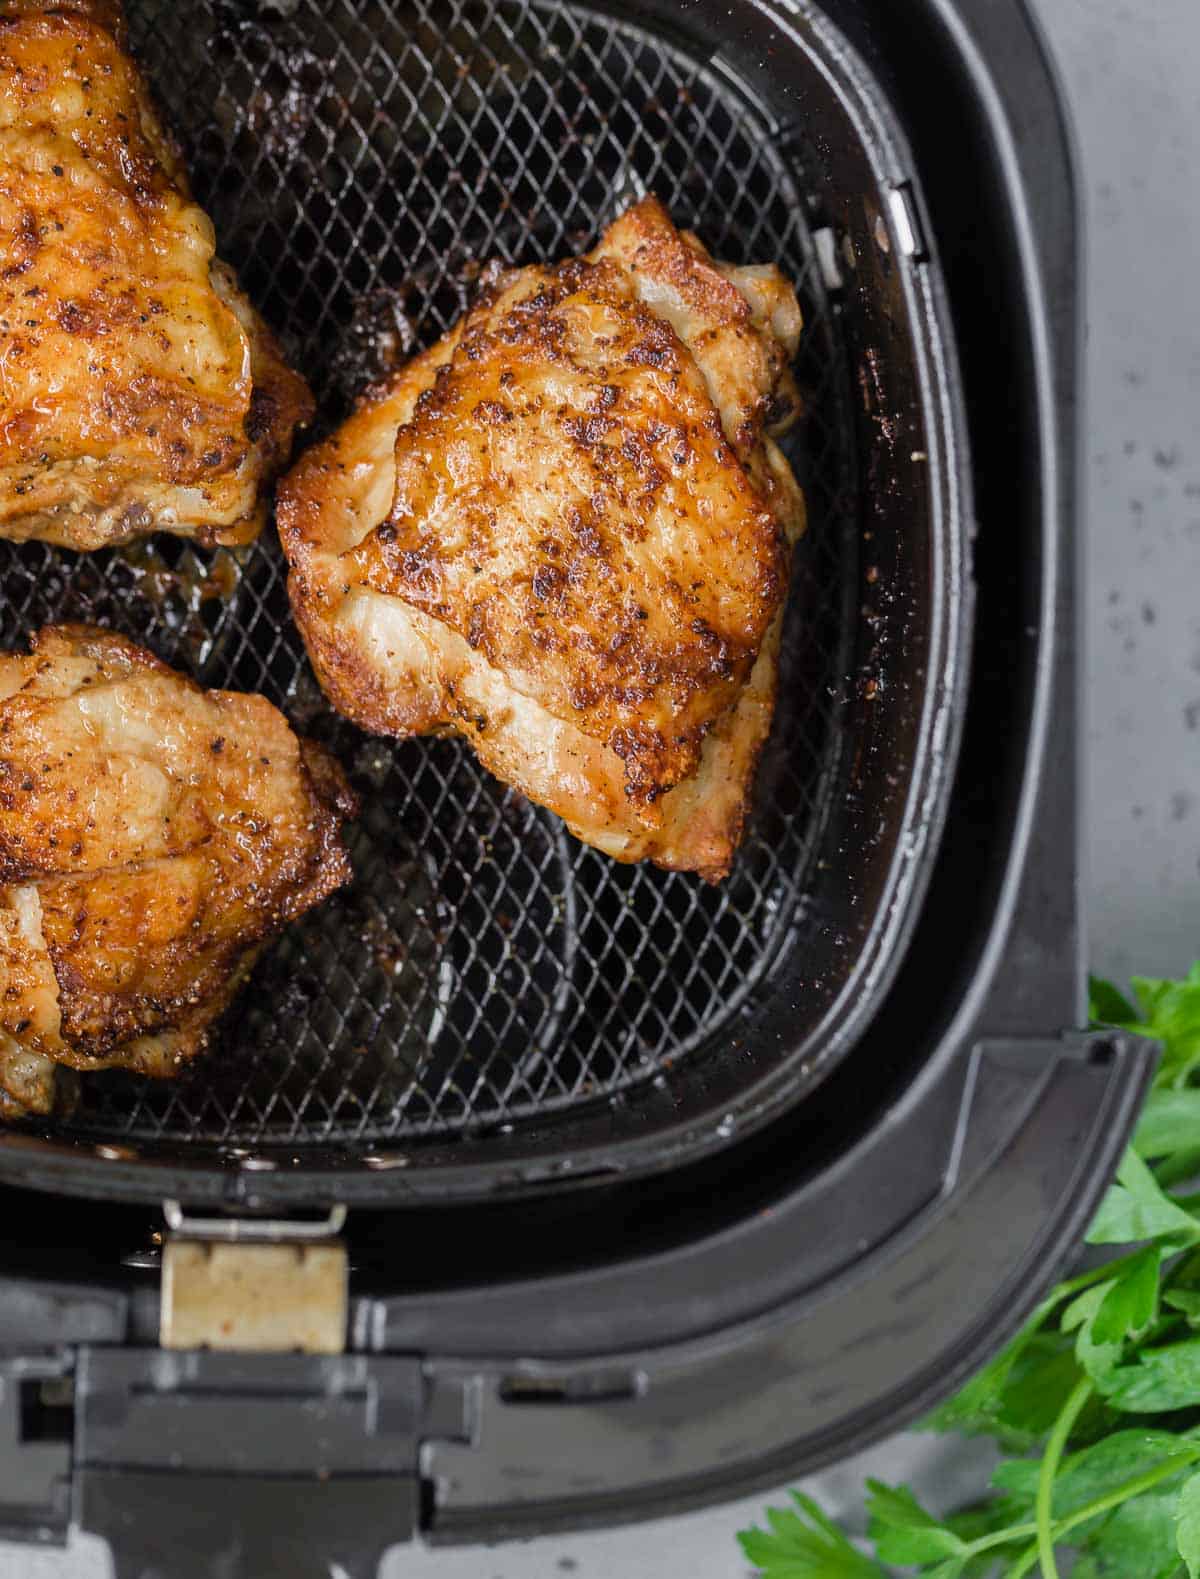 Overhead view of three chicken thighs in an air fryer basket.